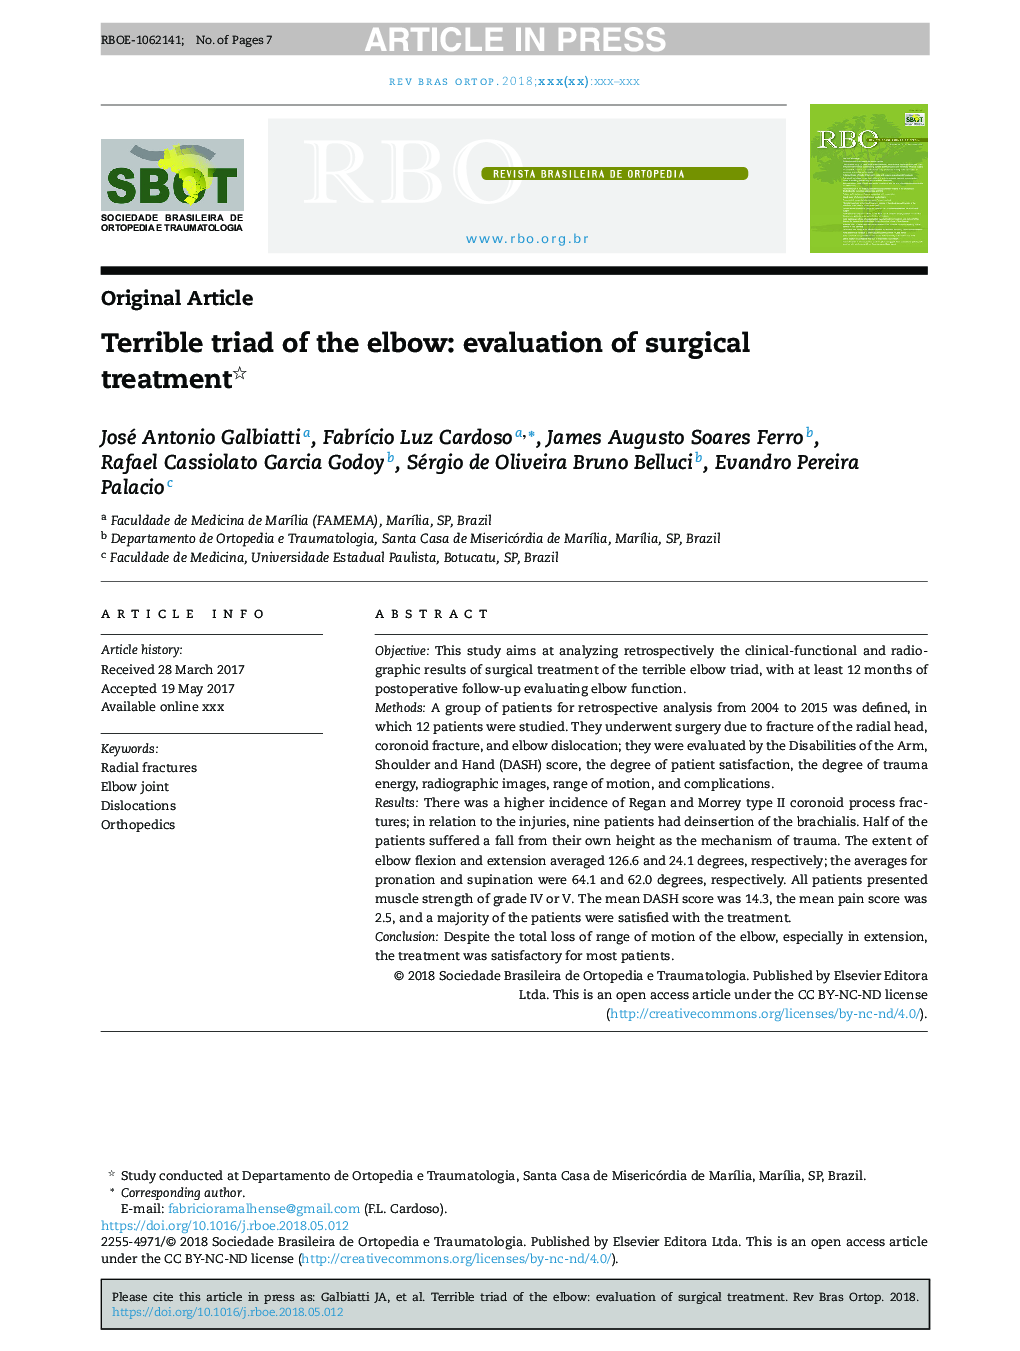 Terrible triad of the elbow: evaluation of surgical treatment